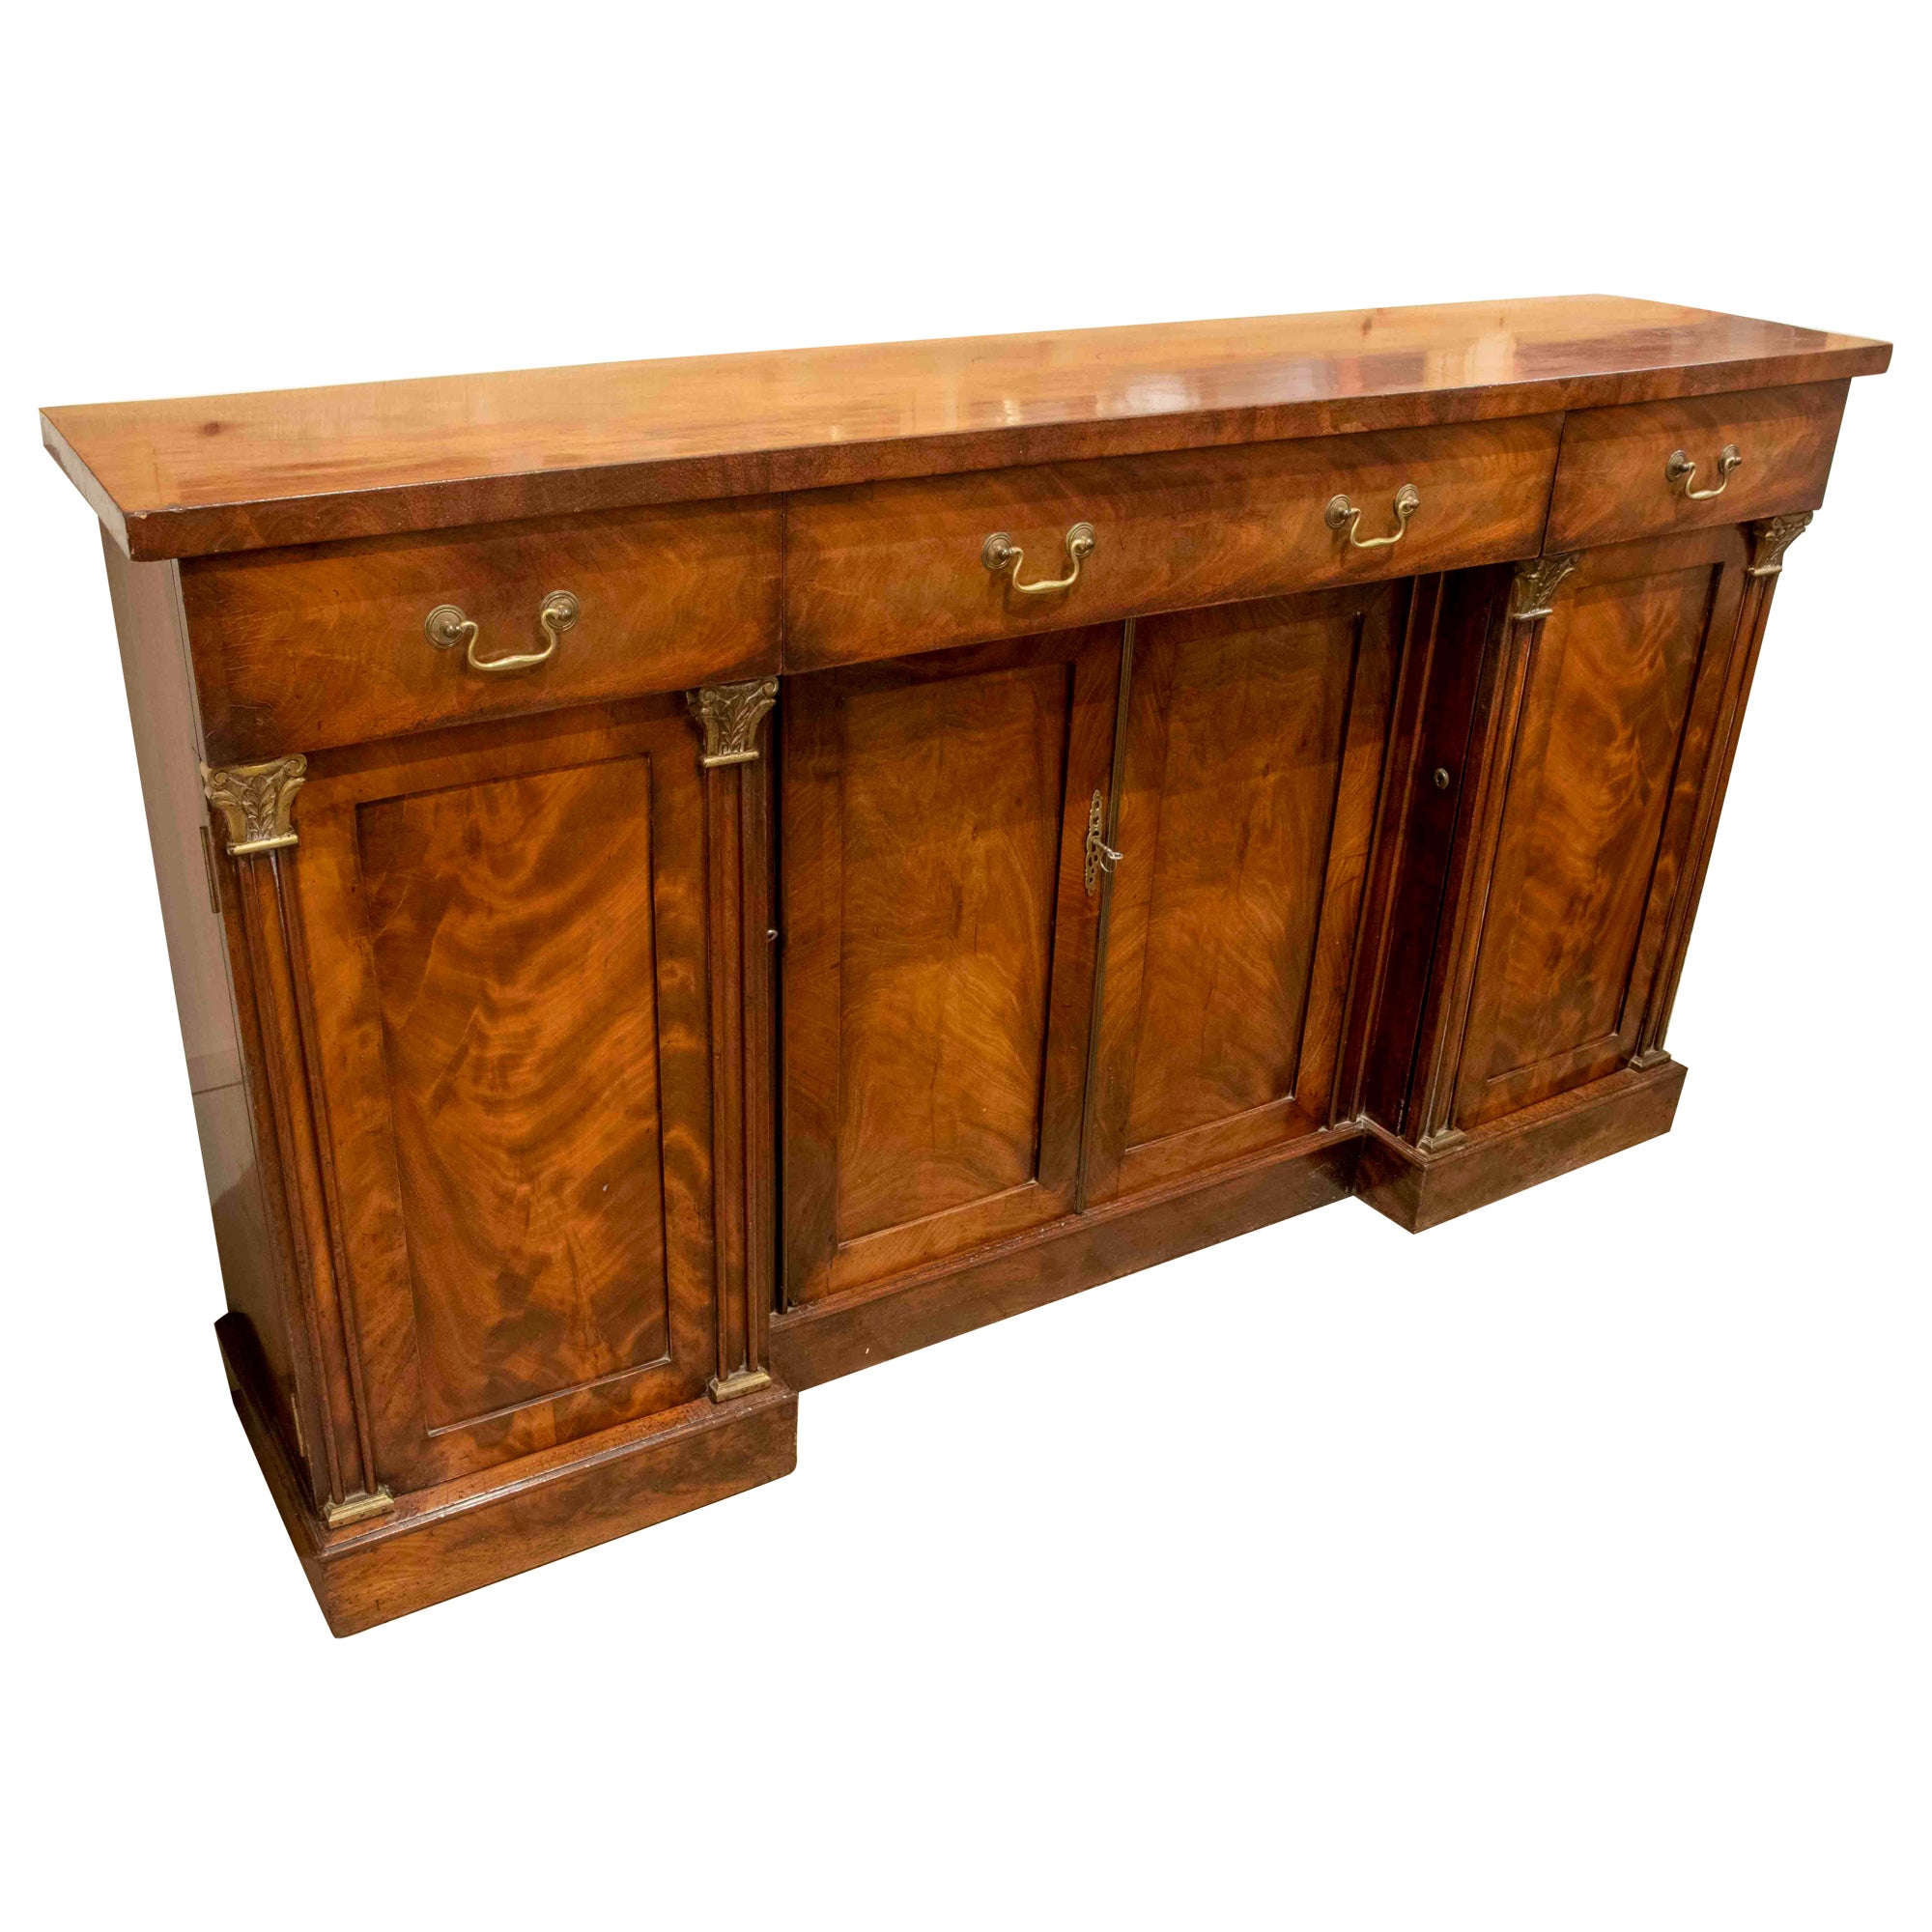 1930s French Mahogany Sideboard with Bronze Handles and Locks